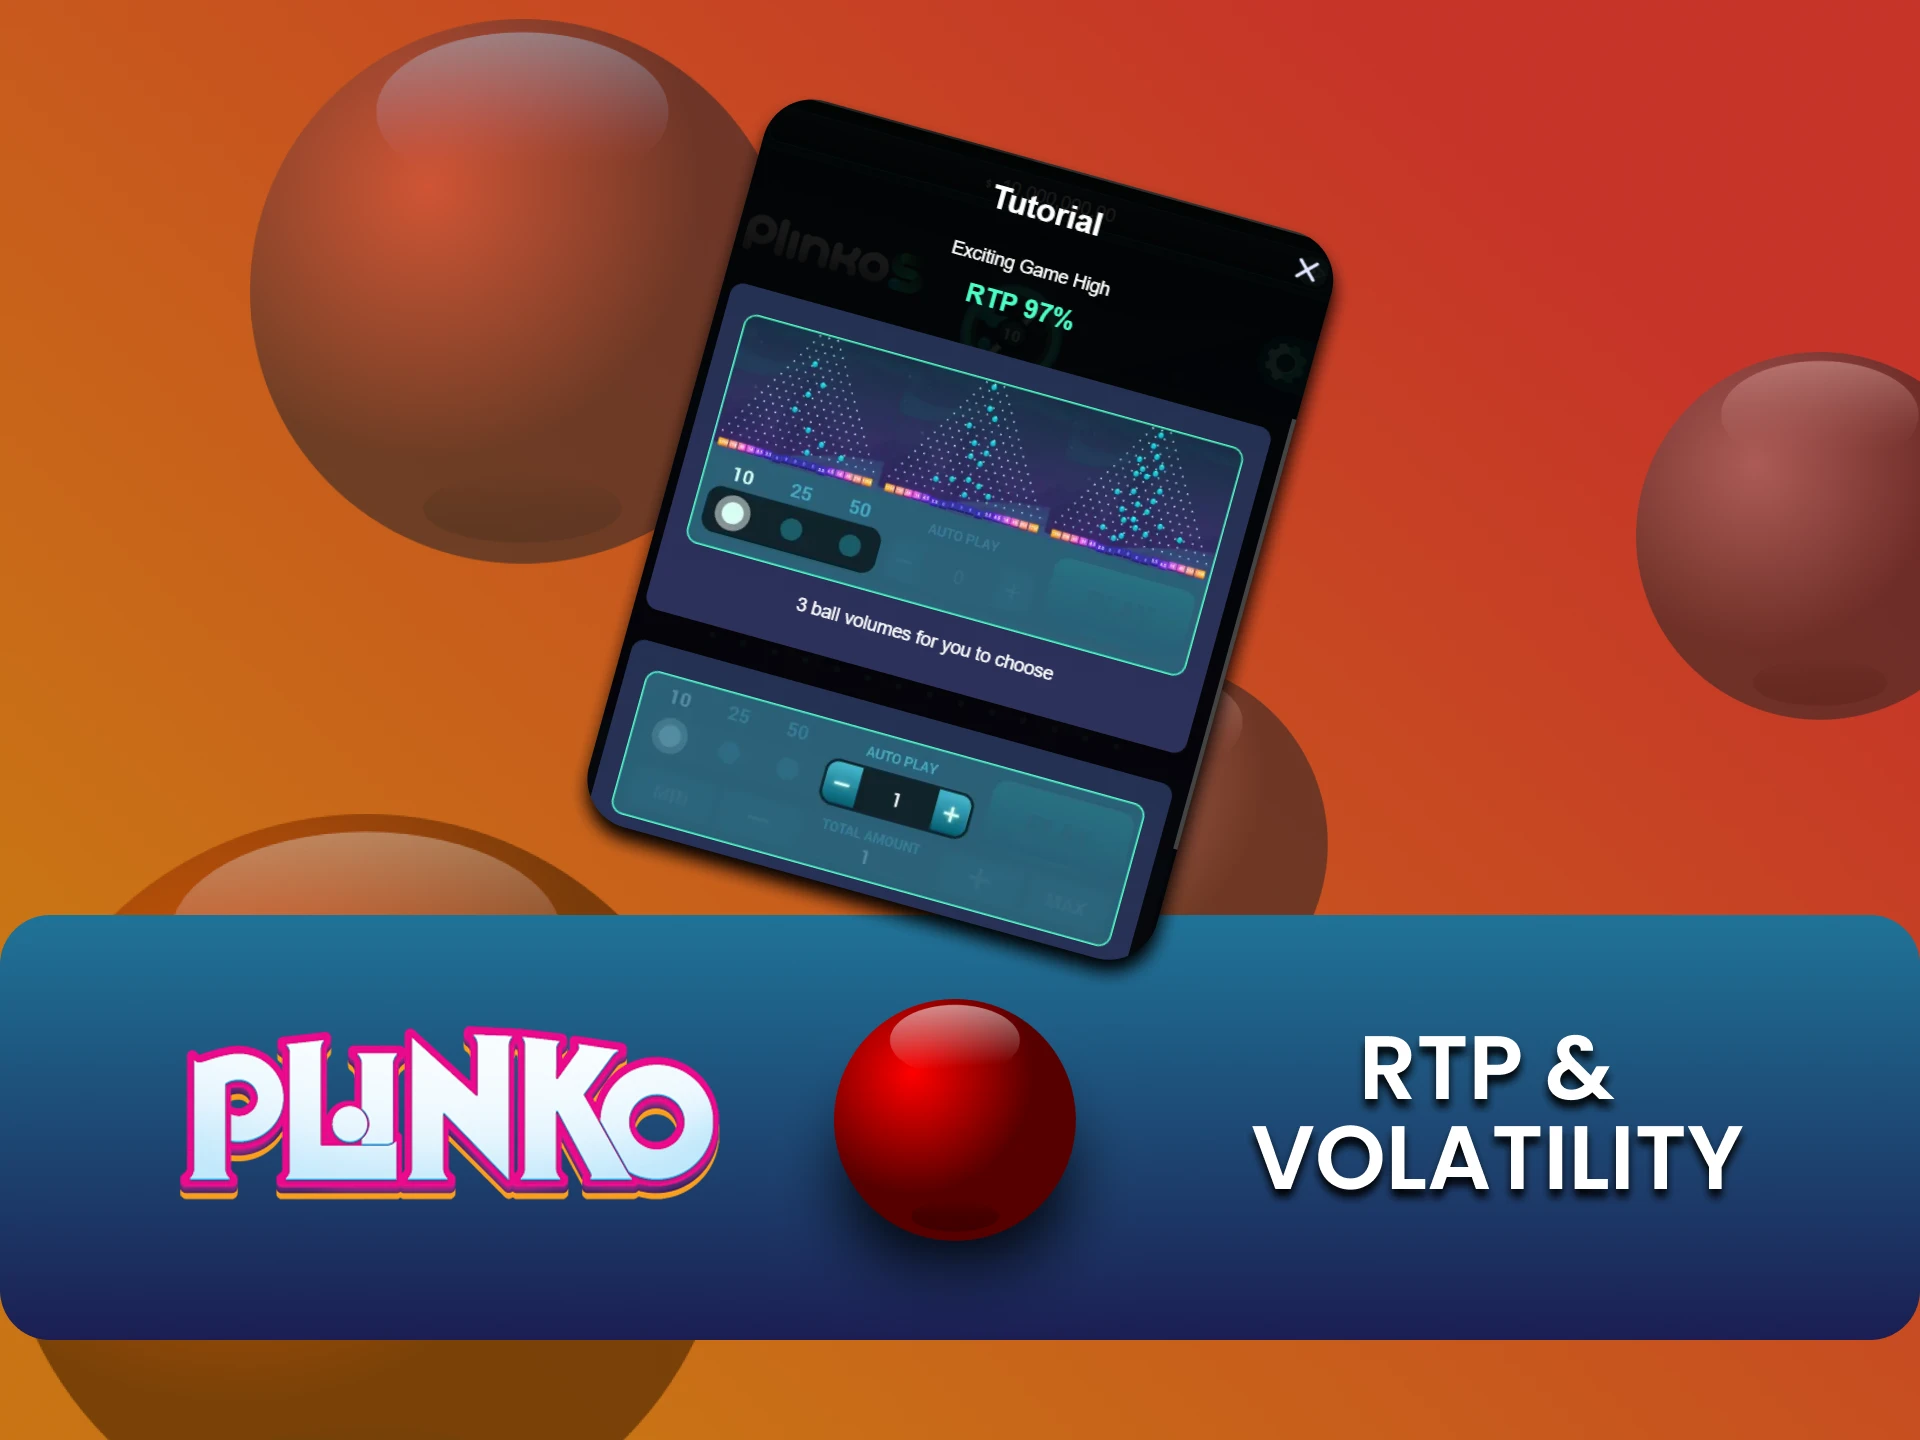 Find out what your chances of winning in Plinko are.